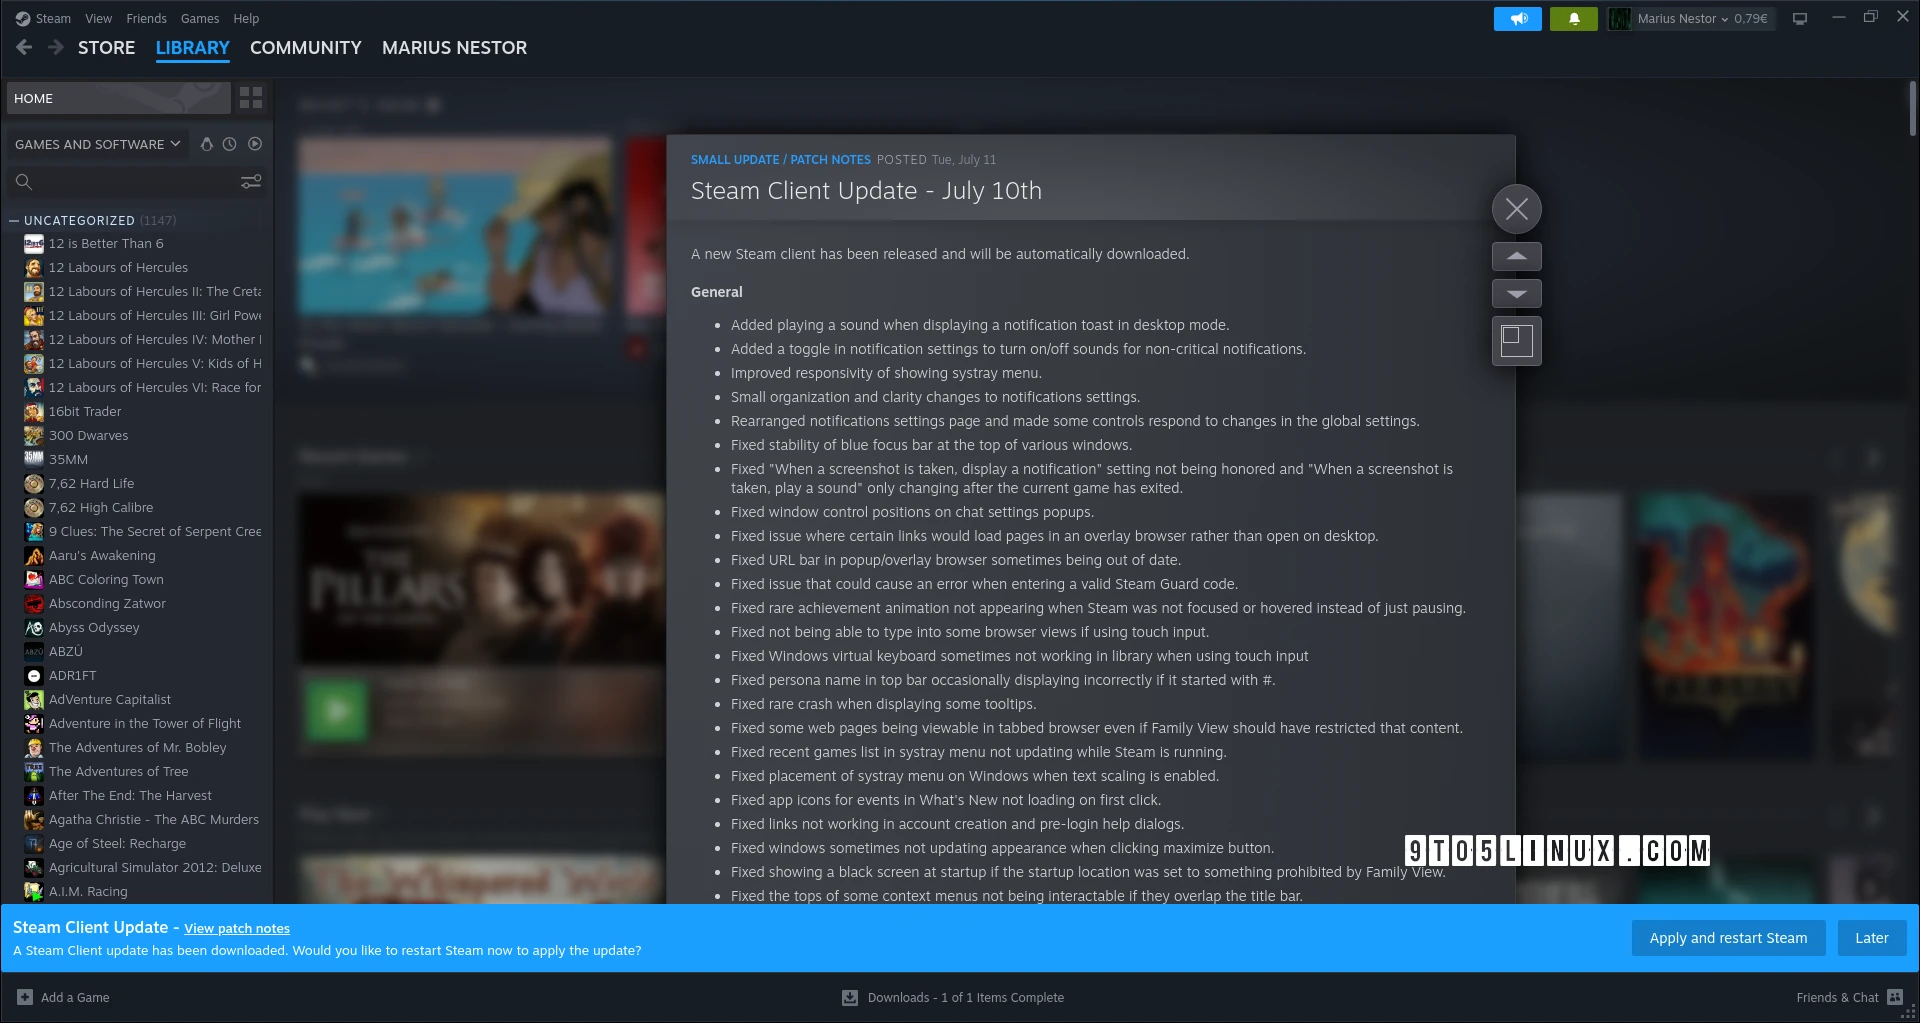 New Steam Client Stable Update Fixes UI Issues on Linux for Intel/AMD Users